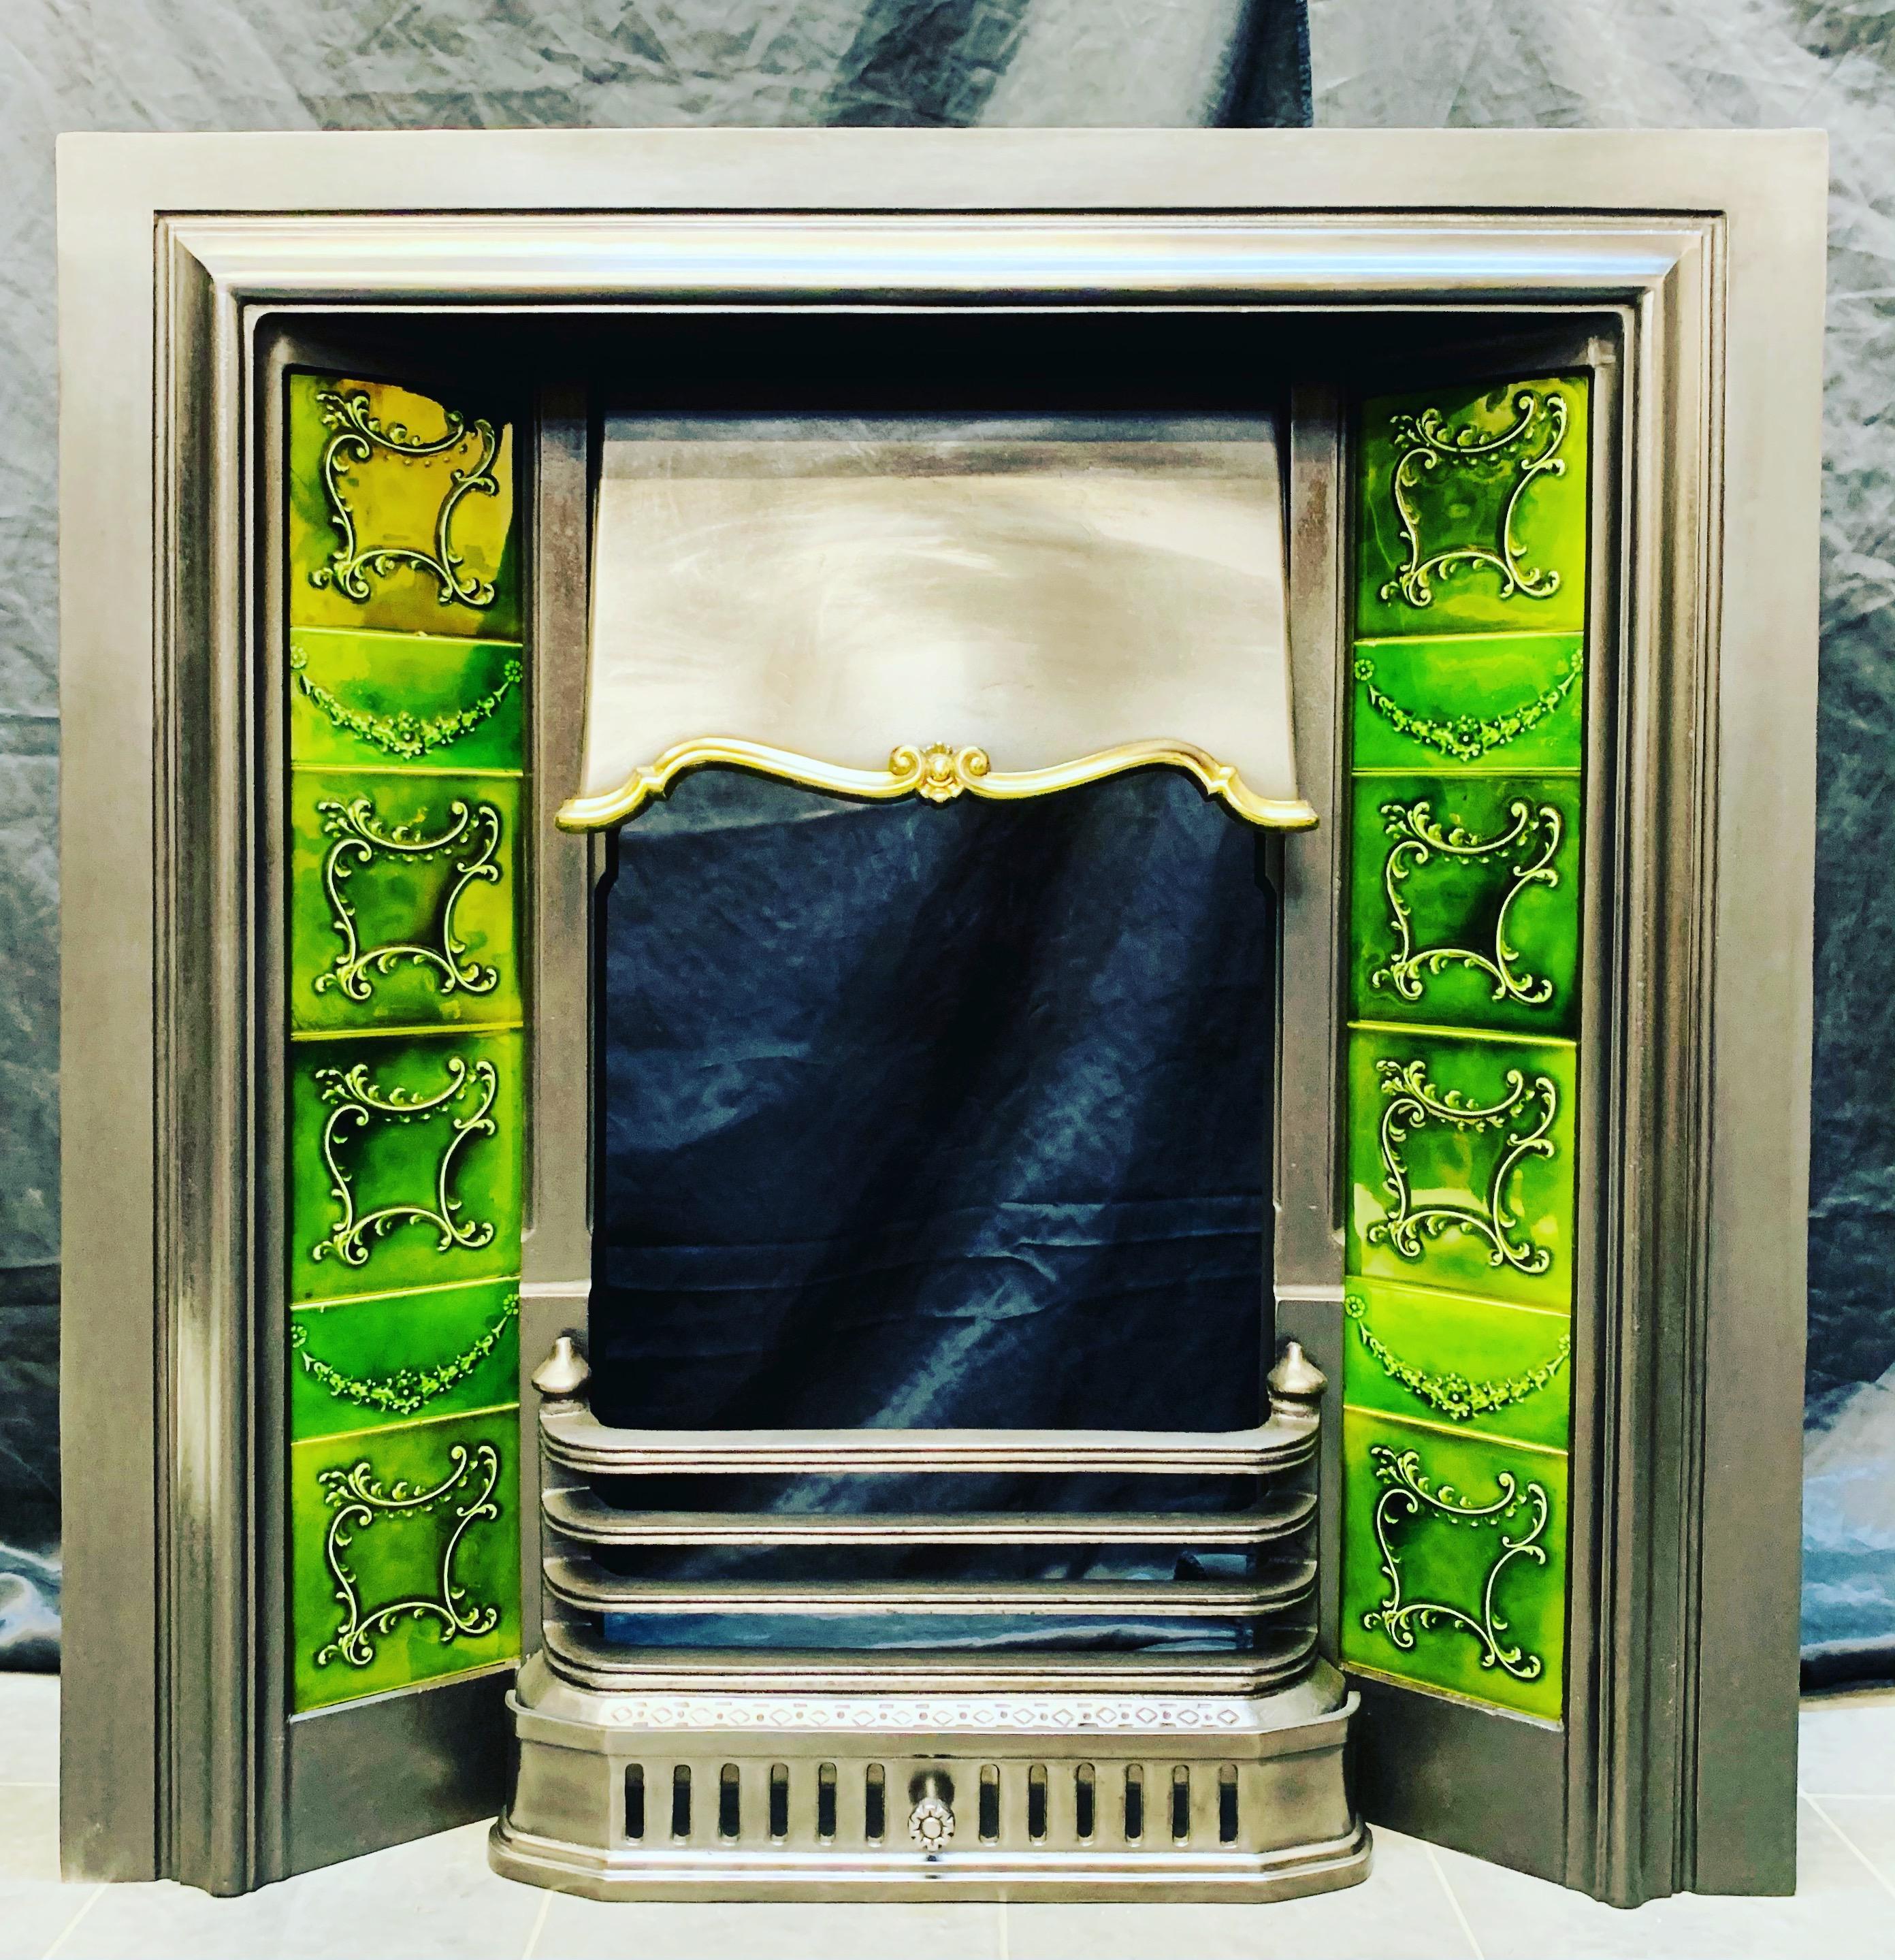 A late Victorian 19th century cast iron fireplace insert with attractive bottle green side tiles. A generous outer frame, with original bottle green side tiles, centred a shaped hood with brass cartouche embellishment, bellow a three barred fire